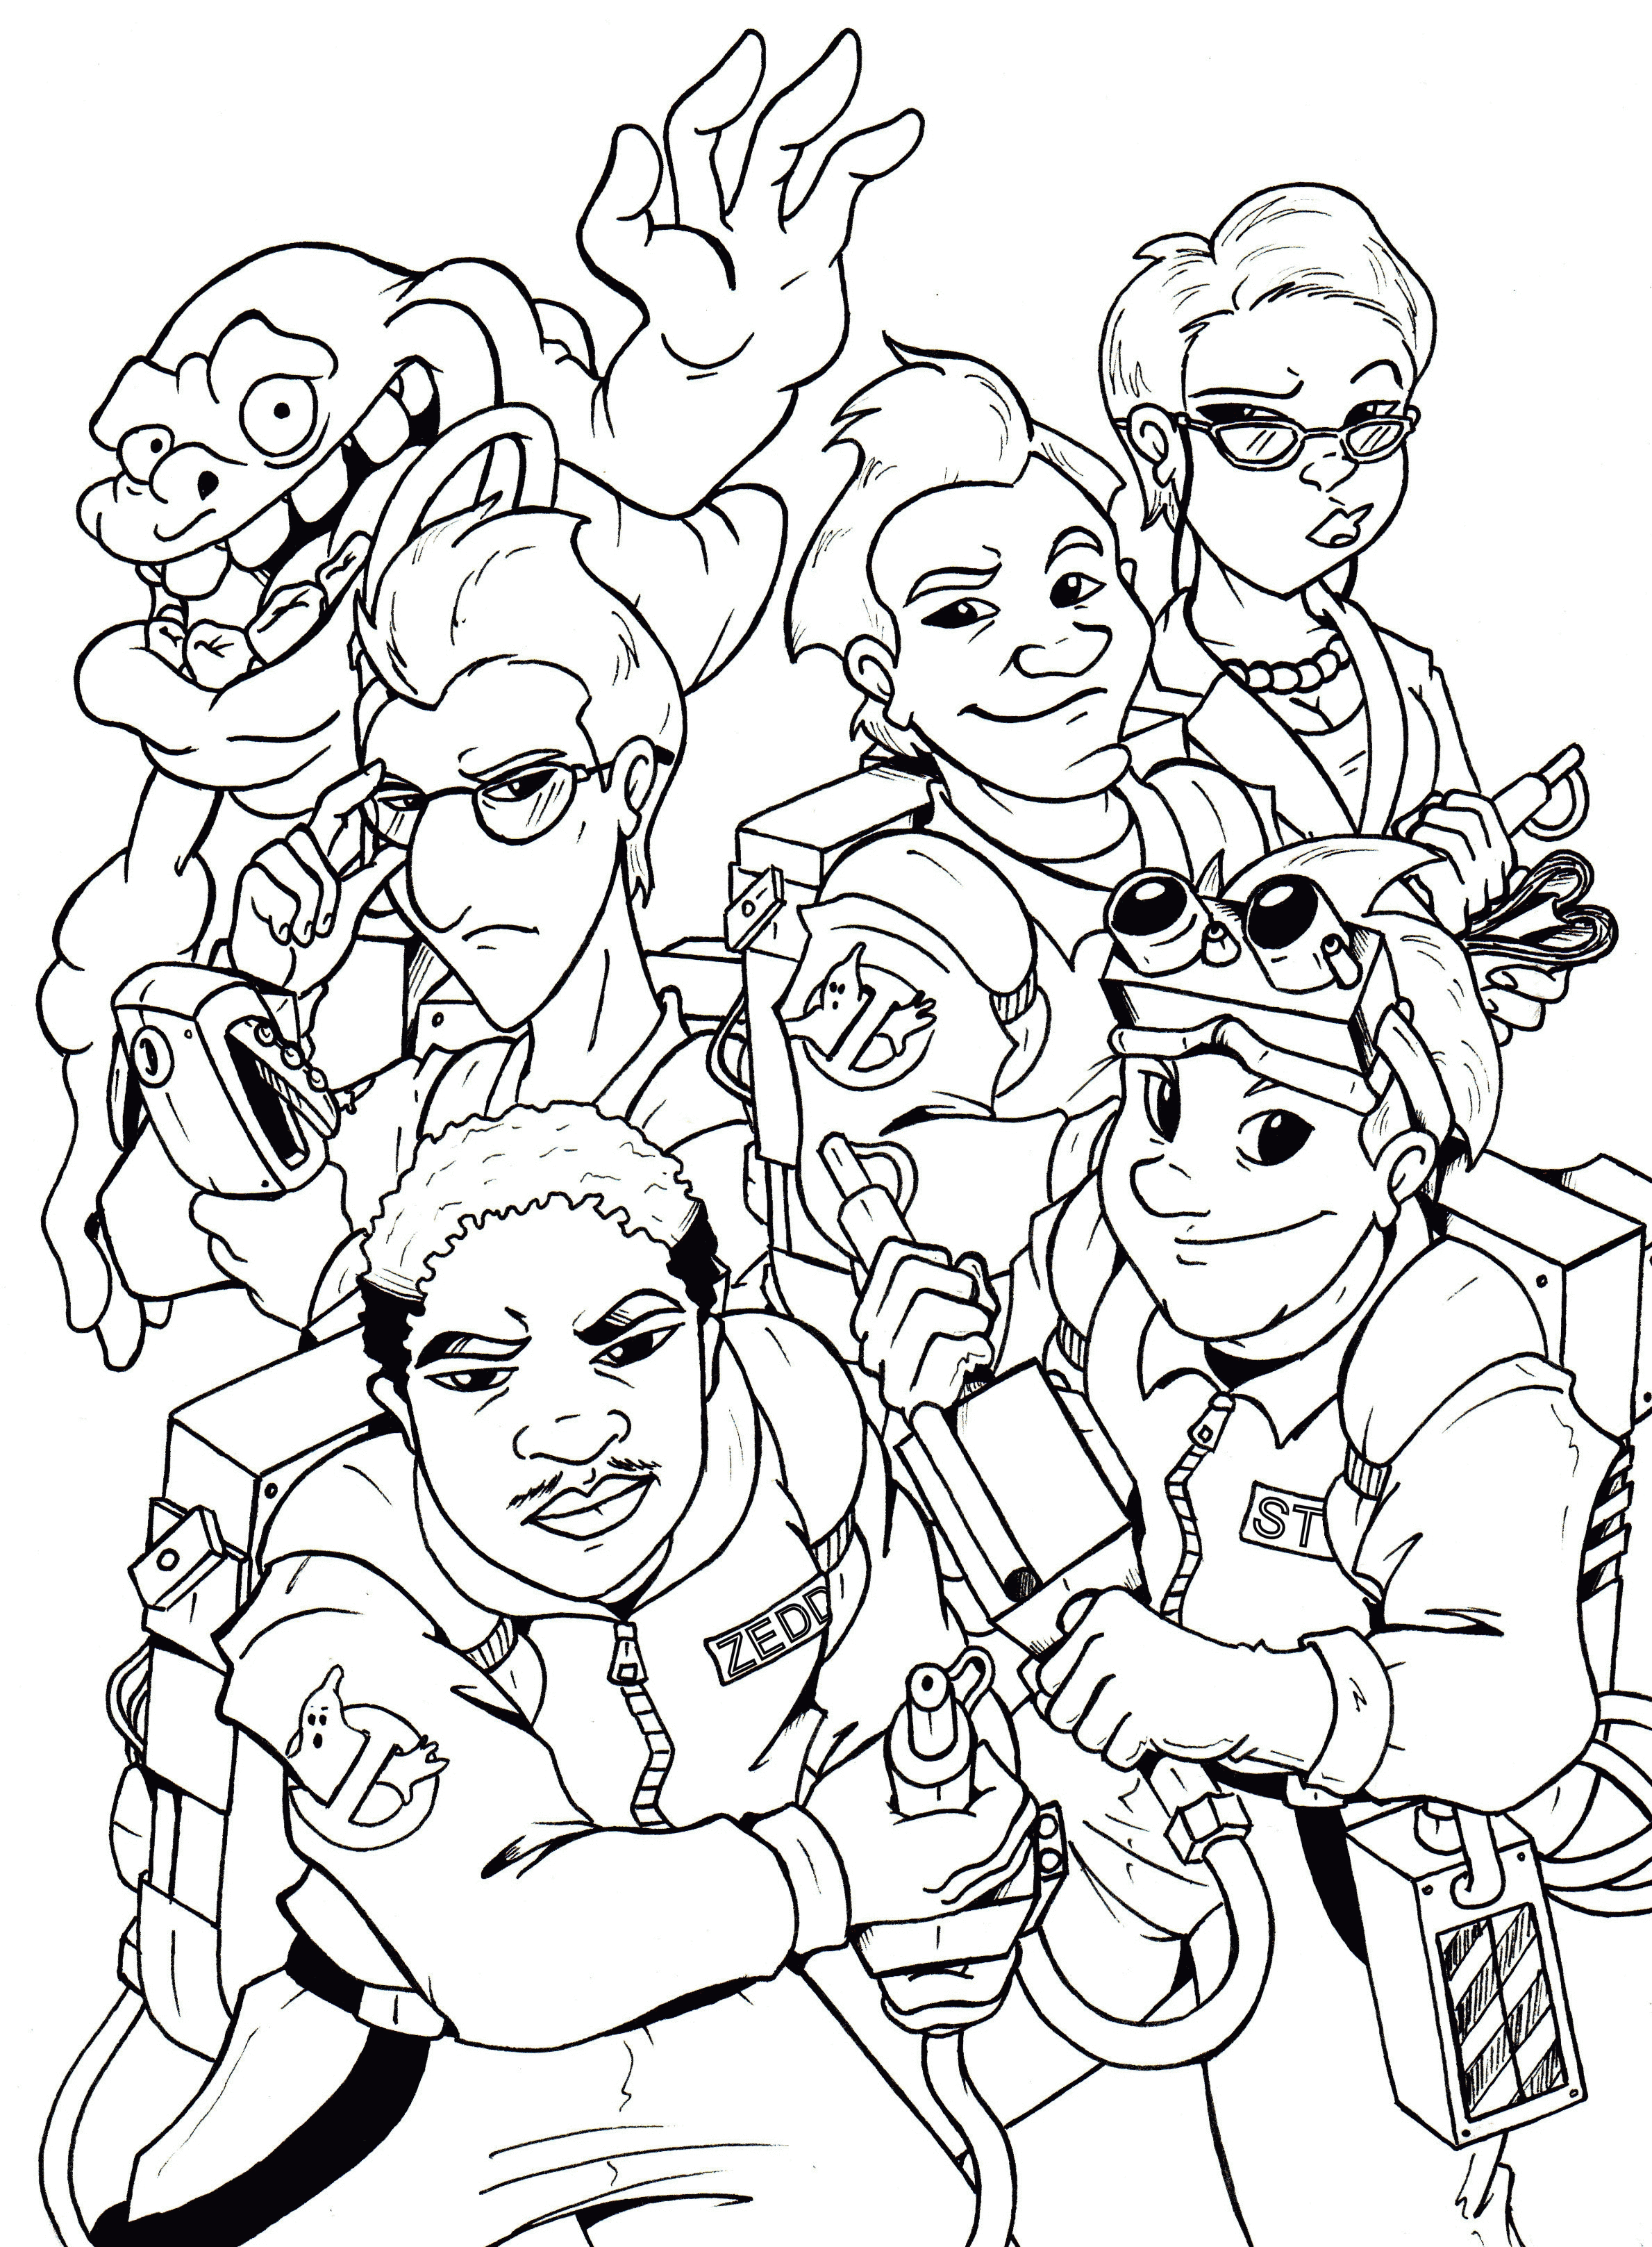 Ghostbusters Coloring Pages Ghostbusters 3 coloring pages Kids